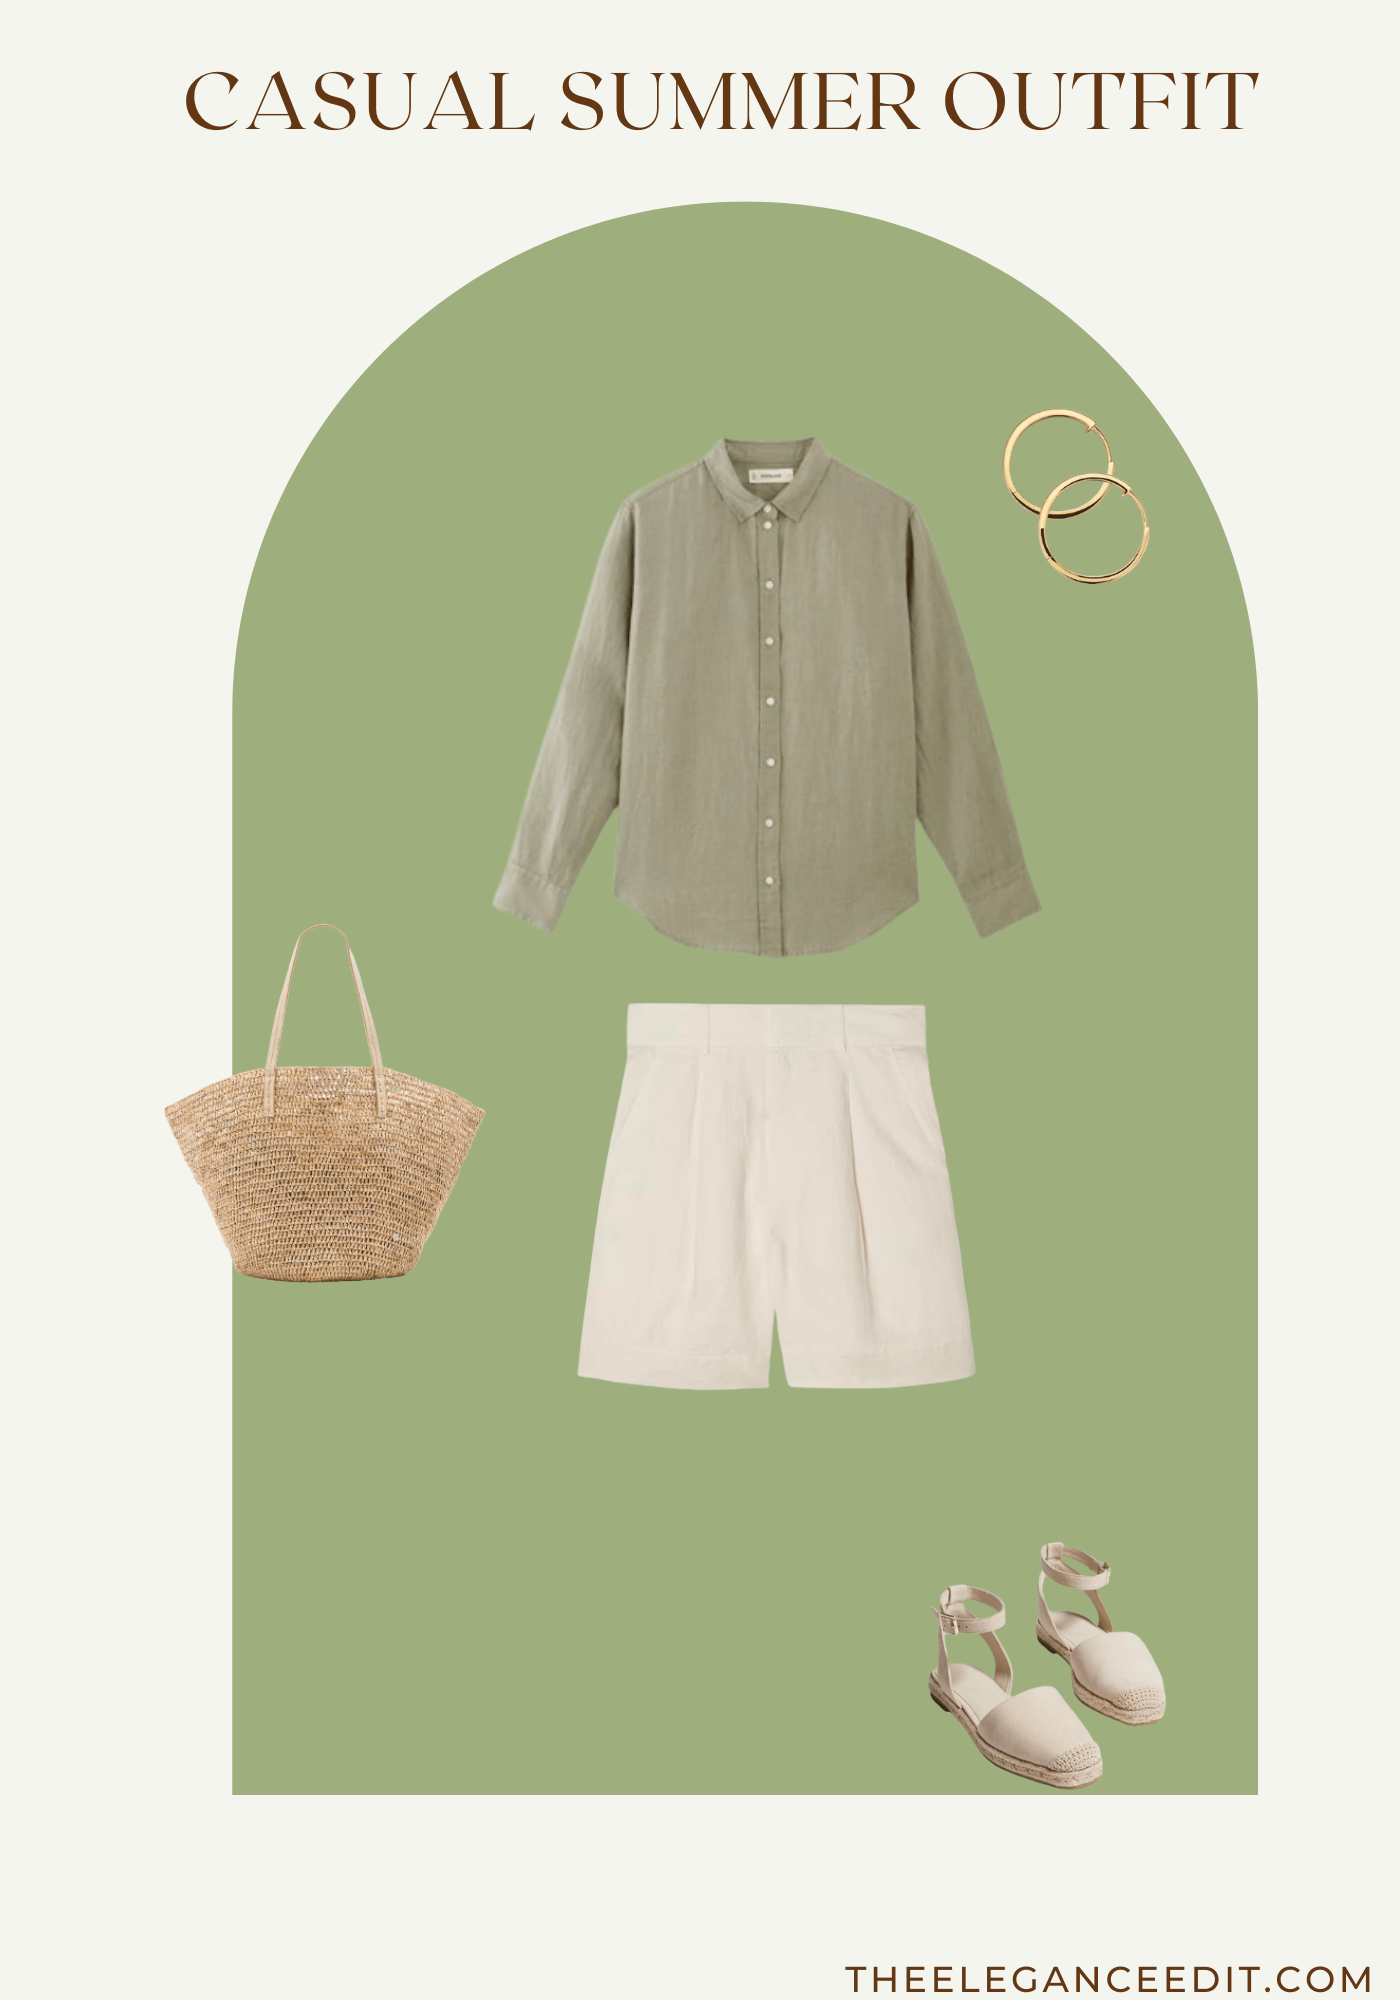 Summer Casual Outfit with linen shorts and espadrilles